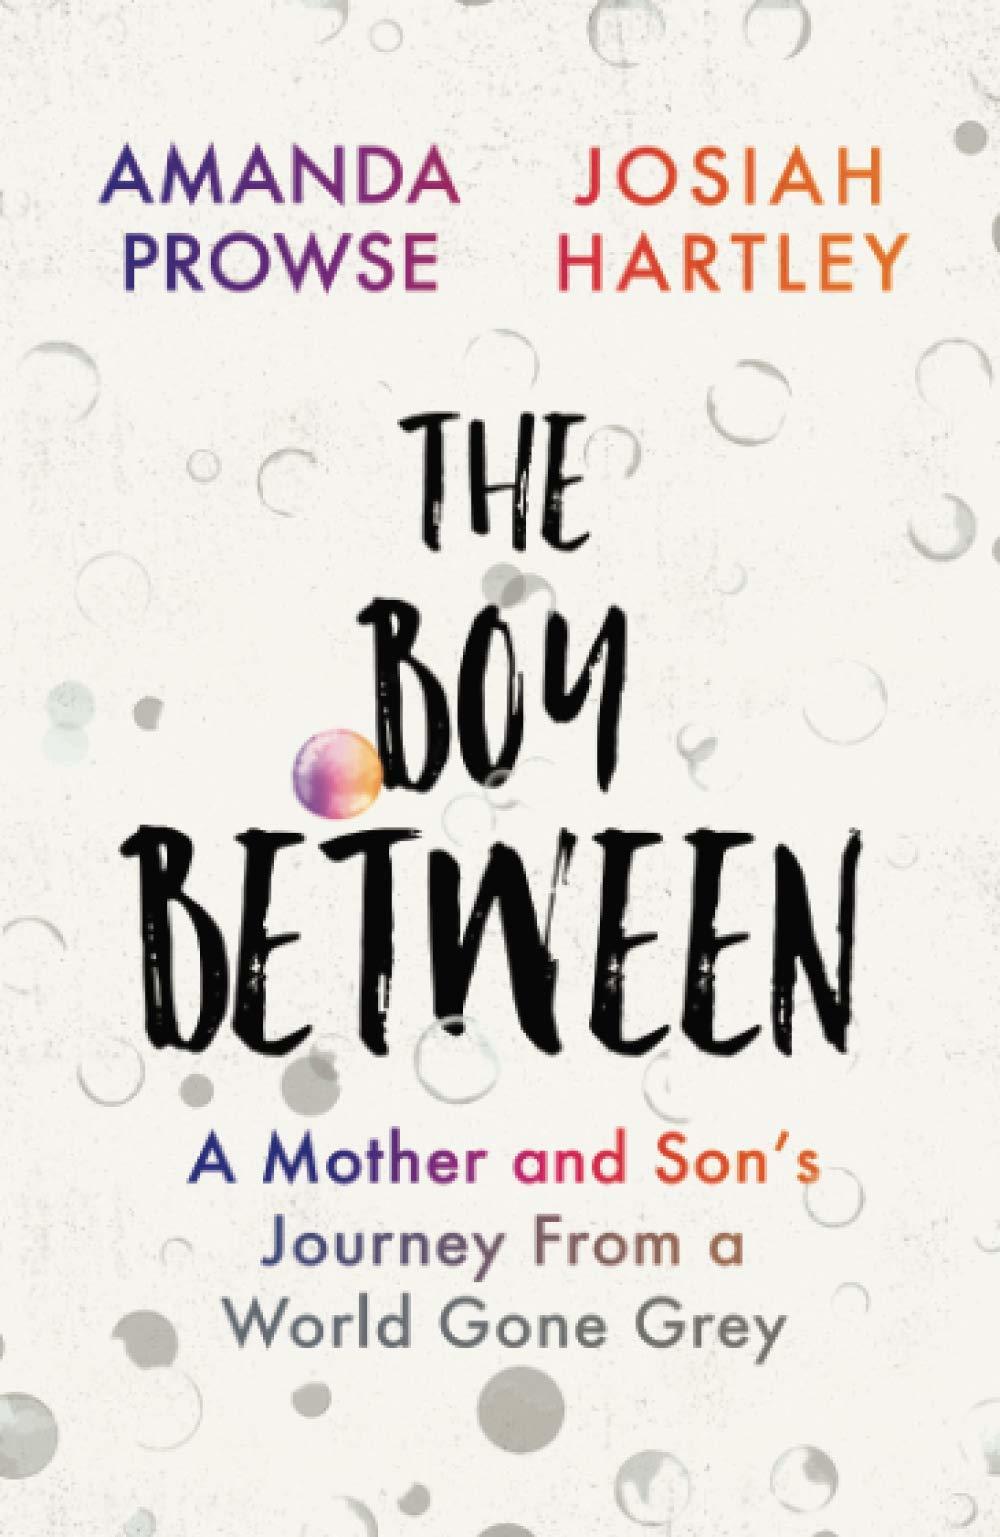 Amanda Prowse and Josiah Hartley: The Boy Between - A Mother and Son’s Journey from a World Gone Grey.